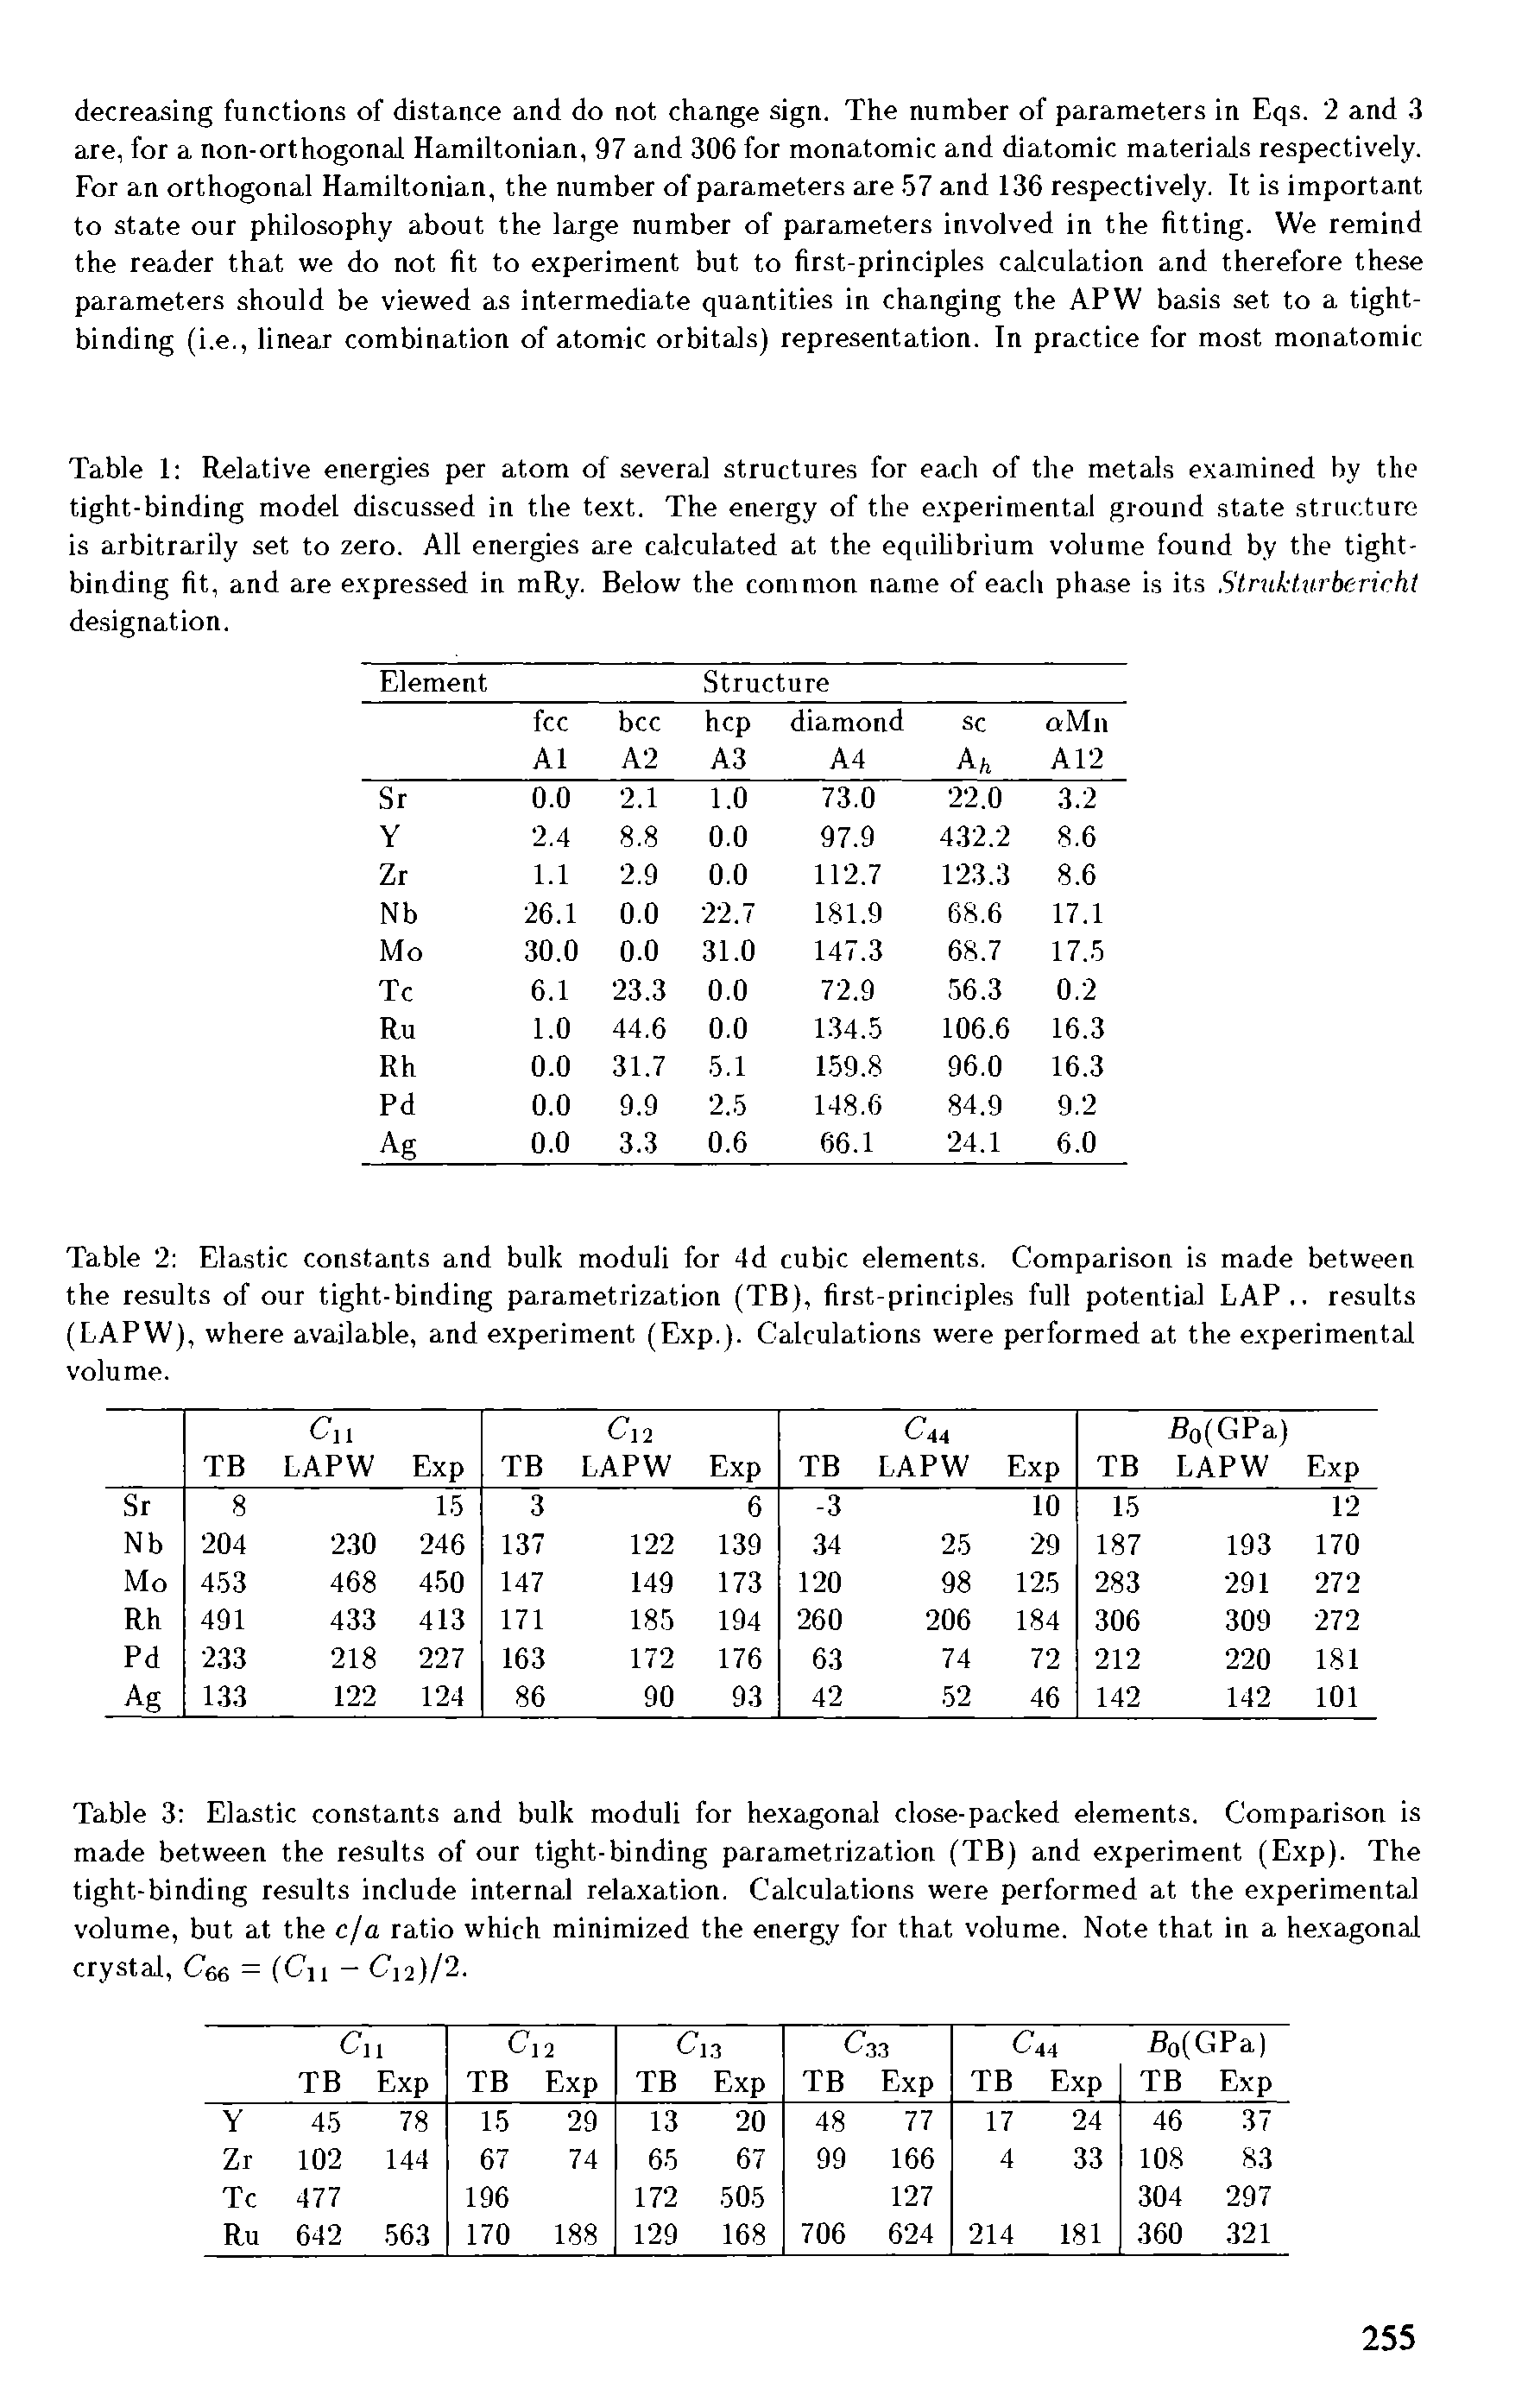 Table 2 Elastic constants and bulk moduli for 4d cubic elements. Comparison is made between the results of our tight-binding parametrization (TB), first-principles full potential LAP., results (LAPW), where available, and experiment (Exp.). Calculations were performed at the experimental volume.